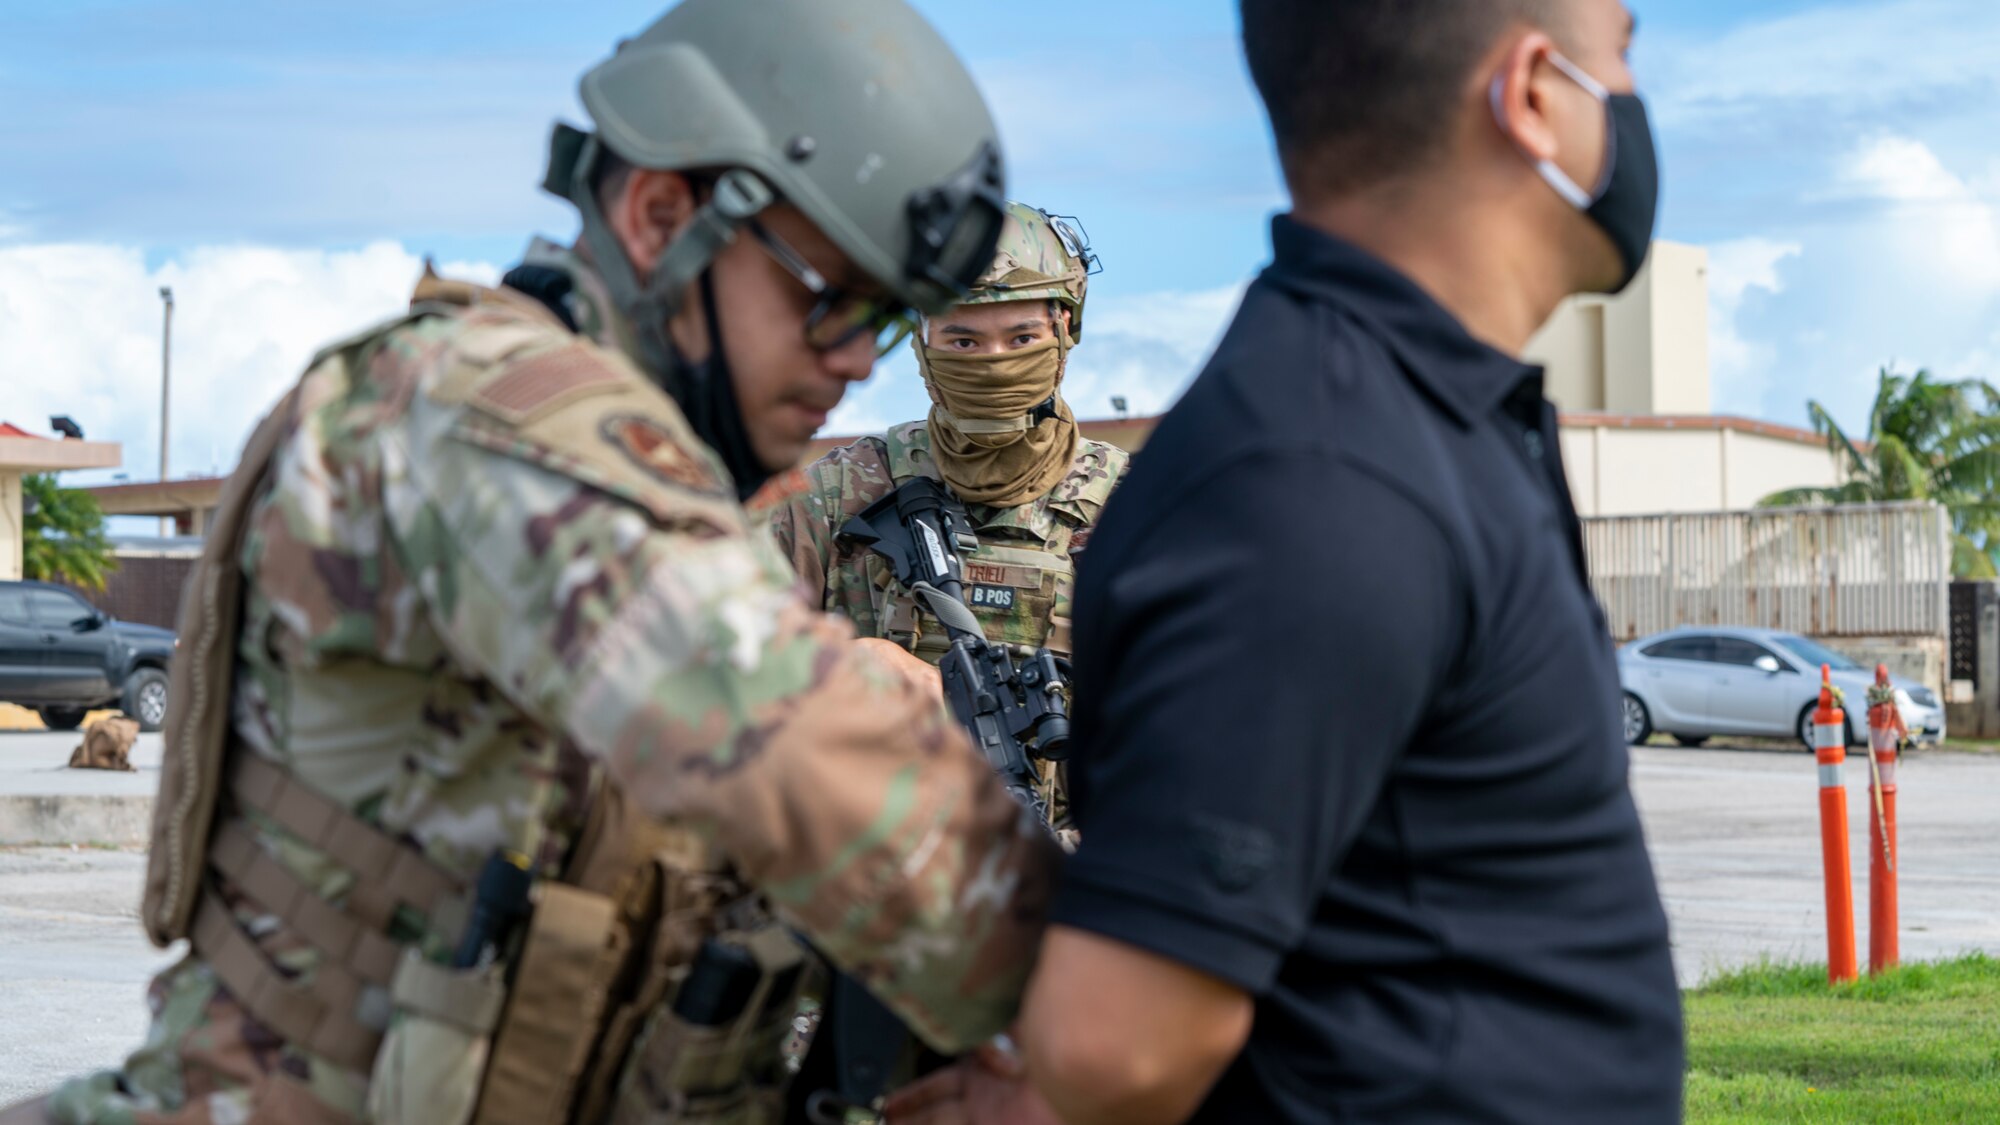 Members of the 736th Security Forces Squadron practice handcuffing a suspect during a flightline attack scenario as part of Exercise Sling Stone 21-1 on Nov. 5, 2020 at Andersen Air Force Base, Guam. Exercise Sling Stone is an annual anti-terrorism force protection exercise. The exercise involved multiple training scenarios intended to prepare service members to respond to emergency situations. (U.S. Air Force photo by Tech. Sgt. Esteban Esquivel)